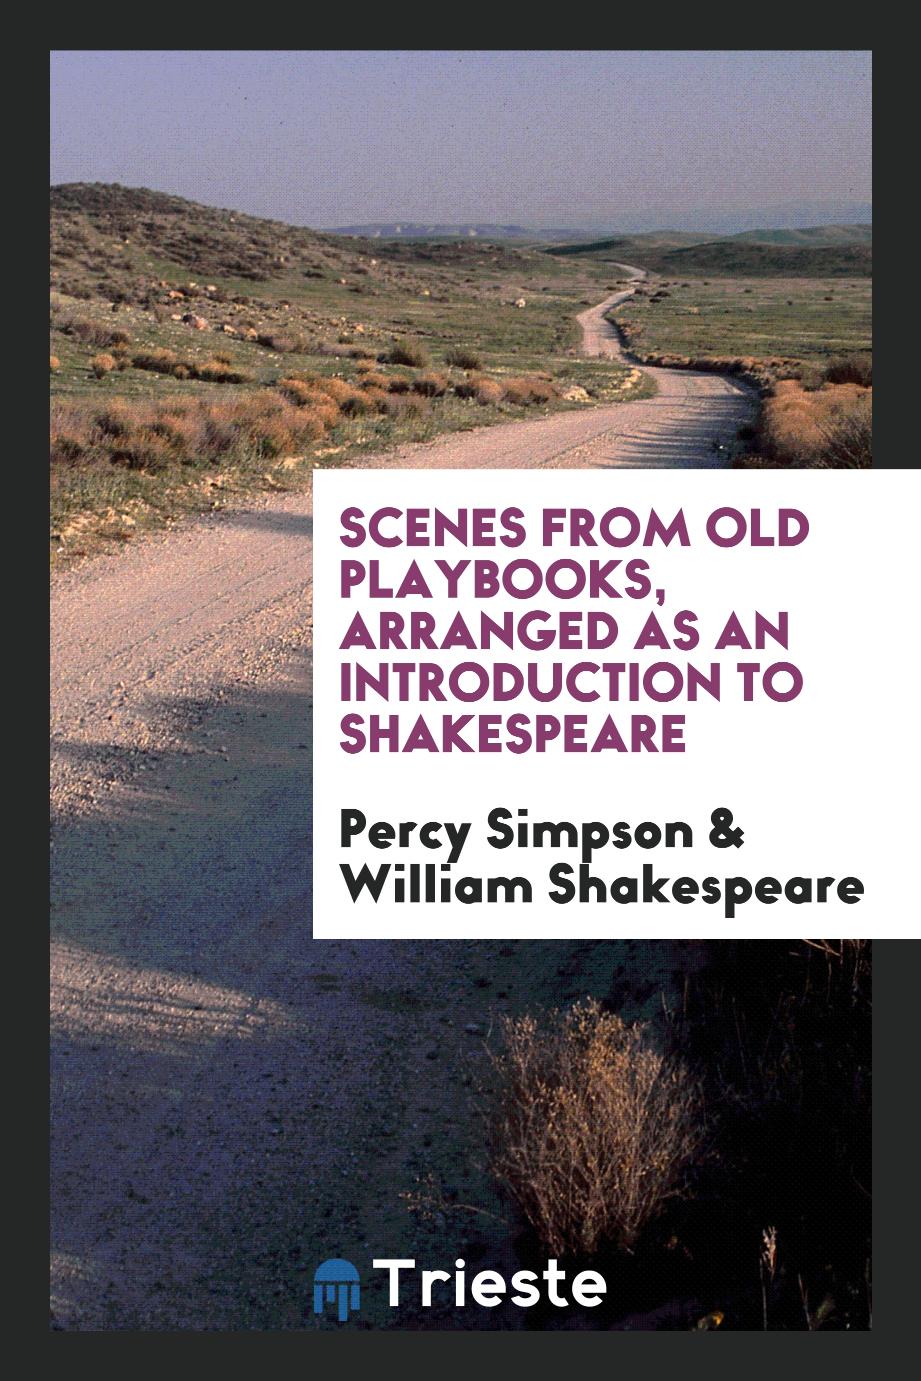 Scenes from old playbooks, arranged as an introduction to Shakespeare